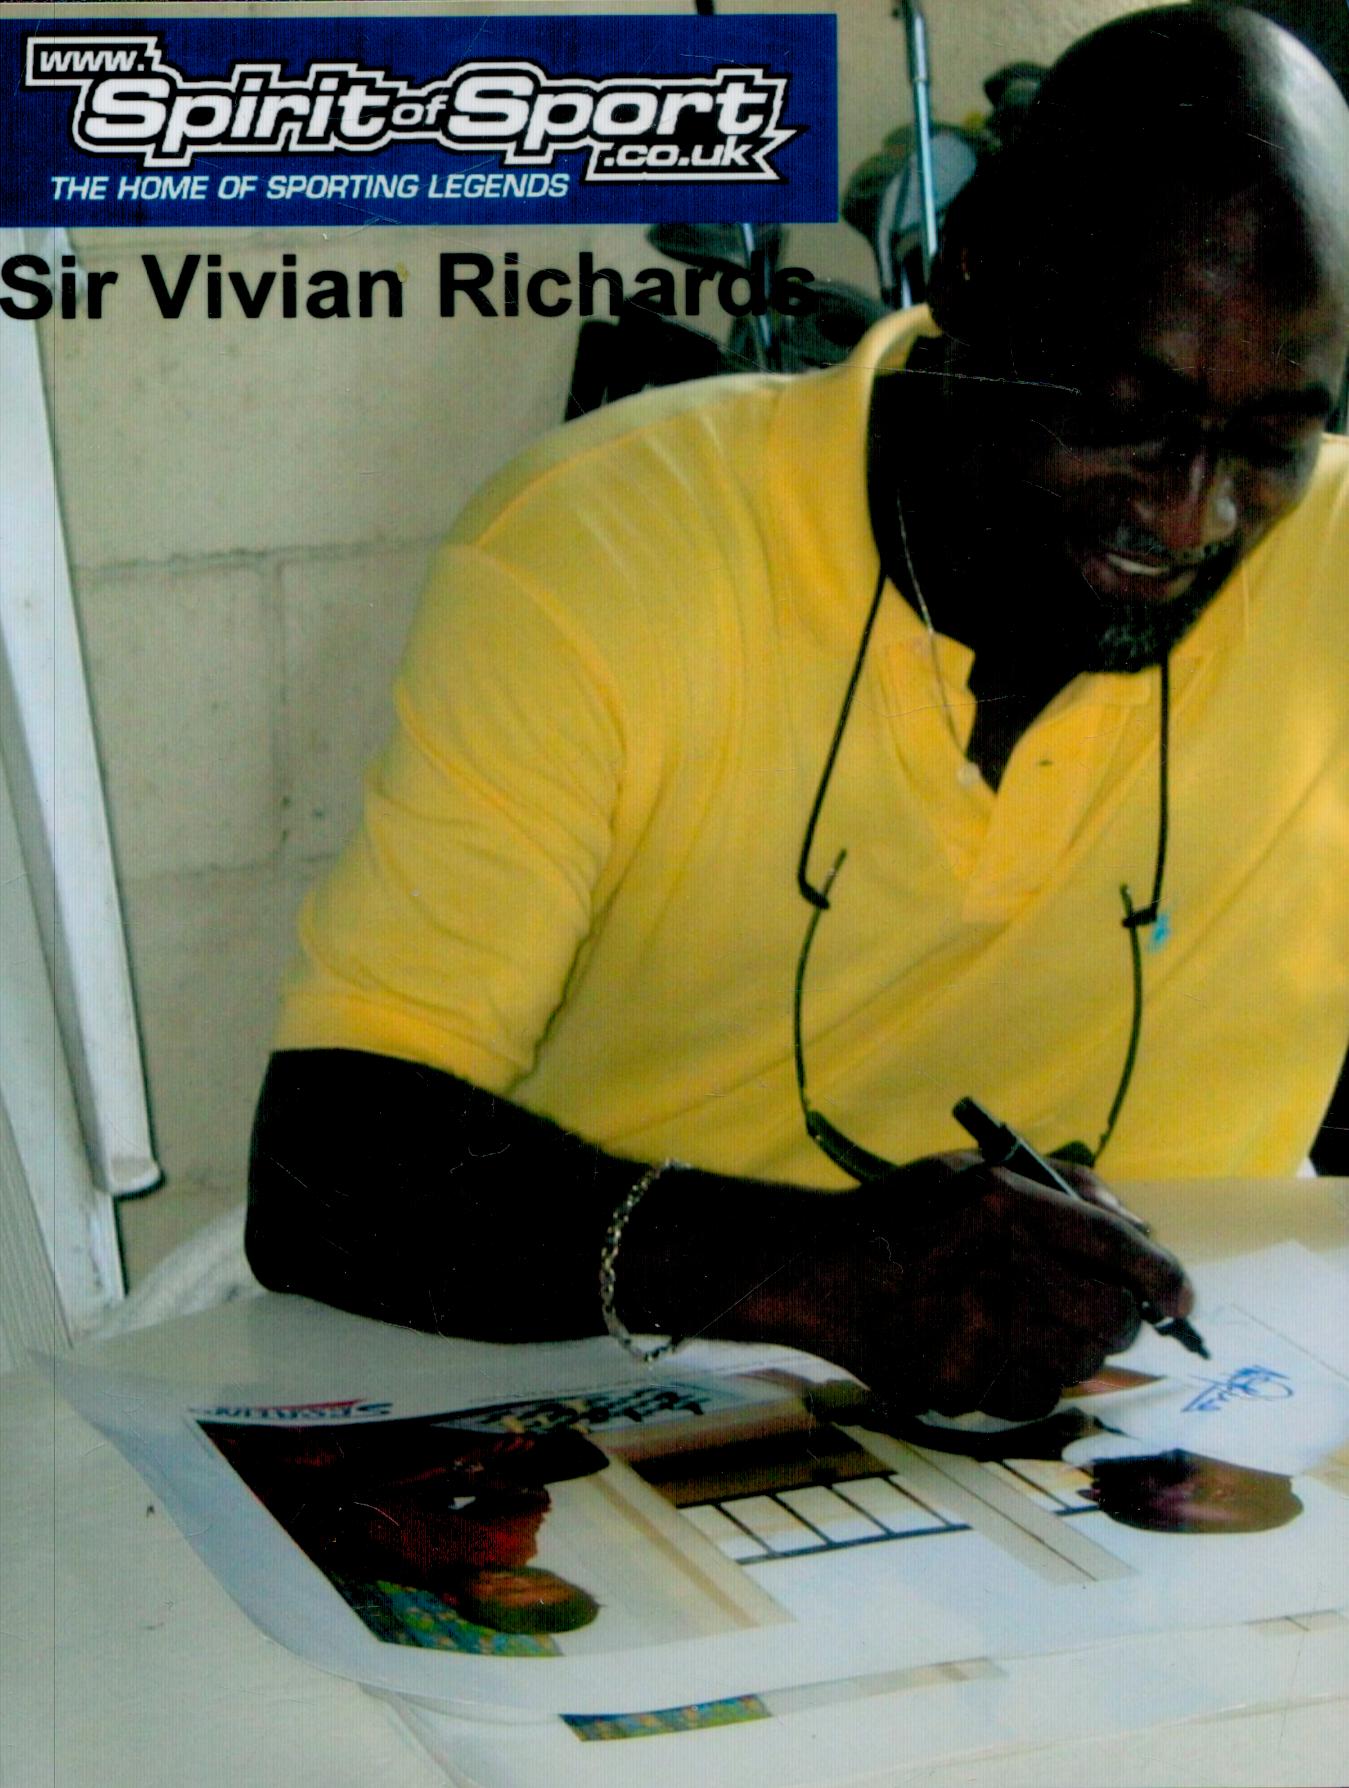 Viv Richards with Sachin Tendulkar signed limited edition print with signing photo Viv Richards, one - Image 2 of 2